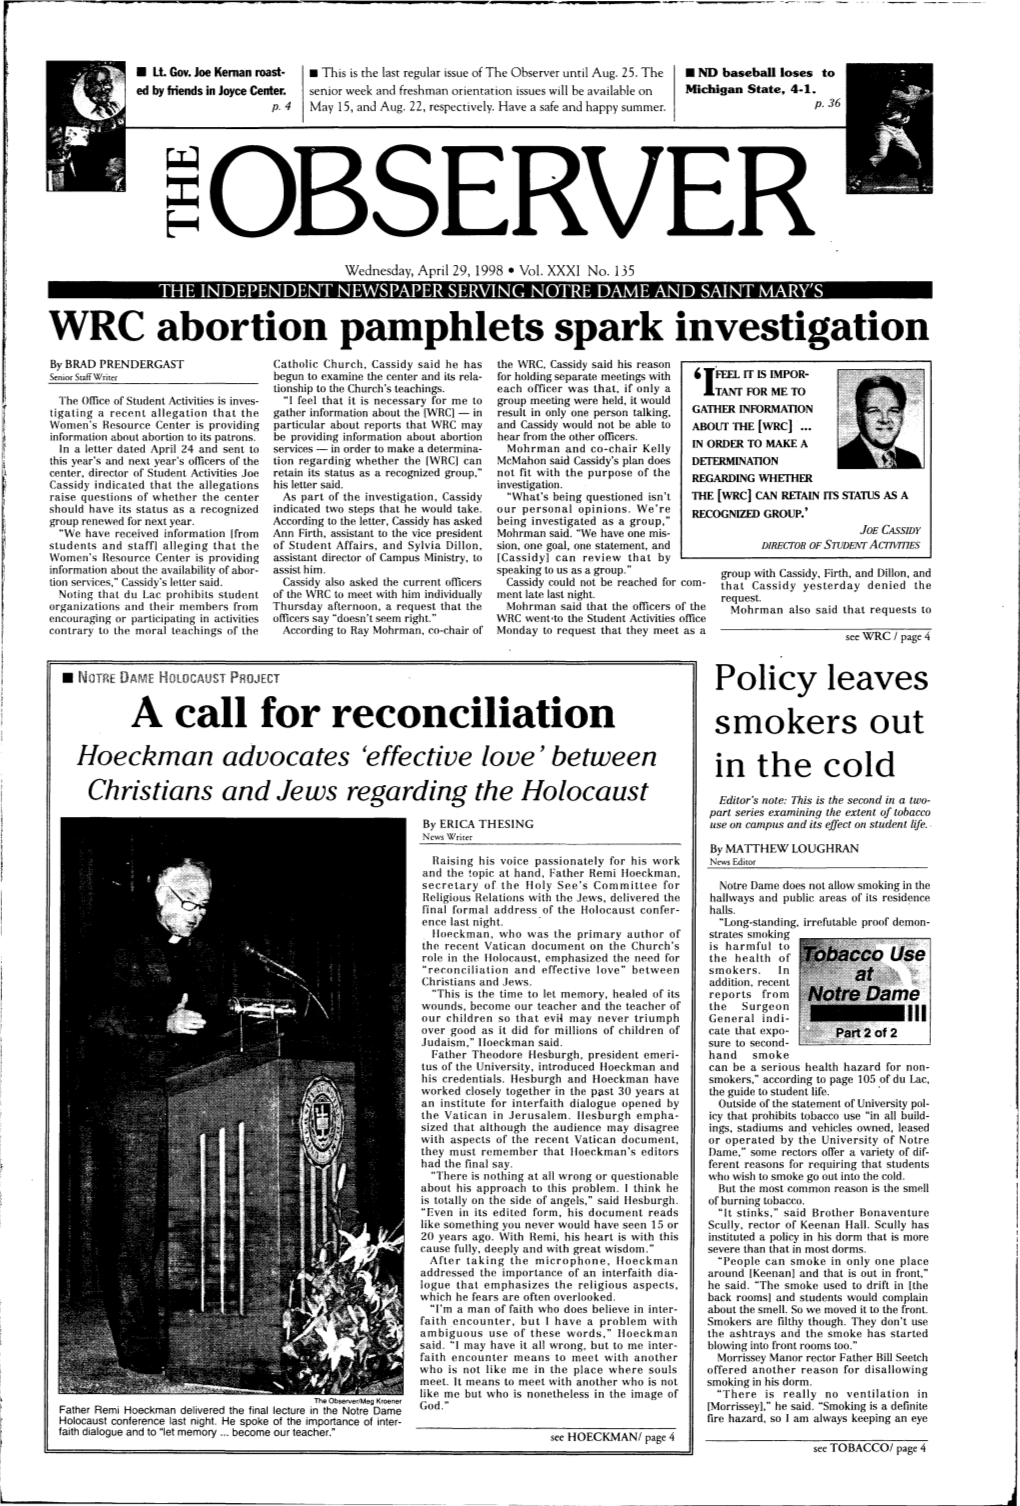 WRC Abortion Pamphlets Spark Investigation a Call for Reconciliation